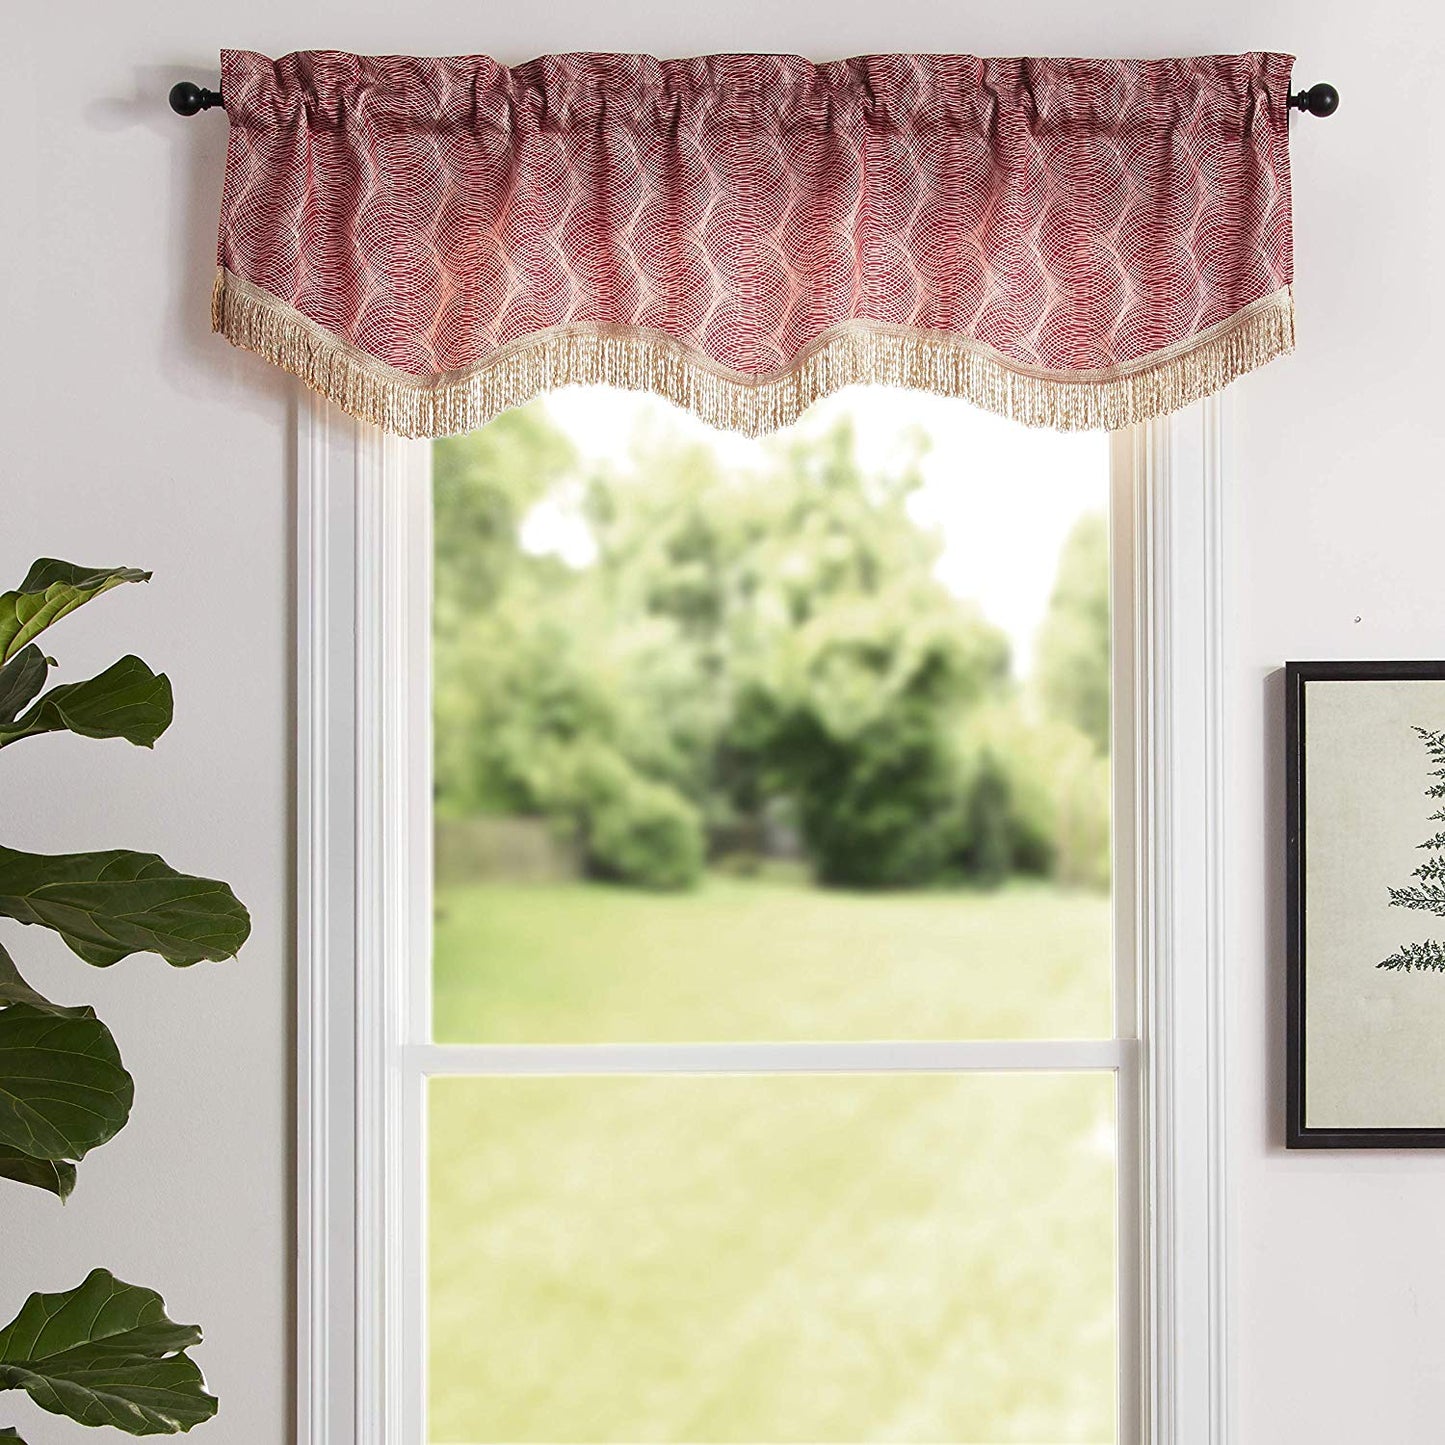 Circular Full Concentric Rings Spiral Pattern Decorative Window Treatment Rod Pocket Curtain Straight Valance